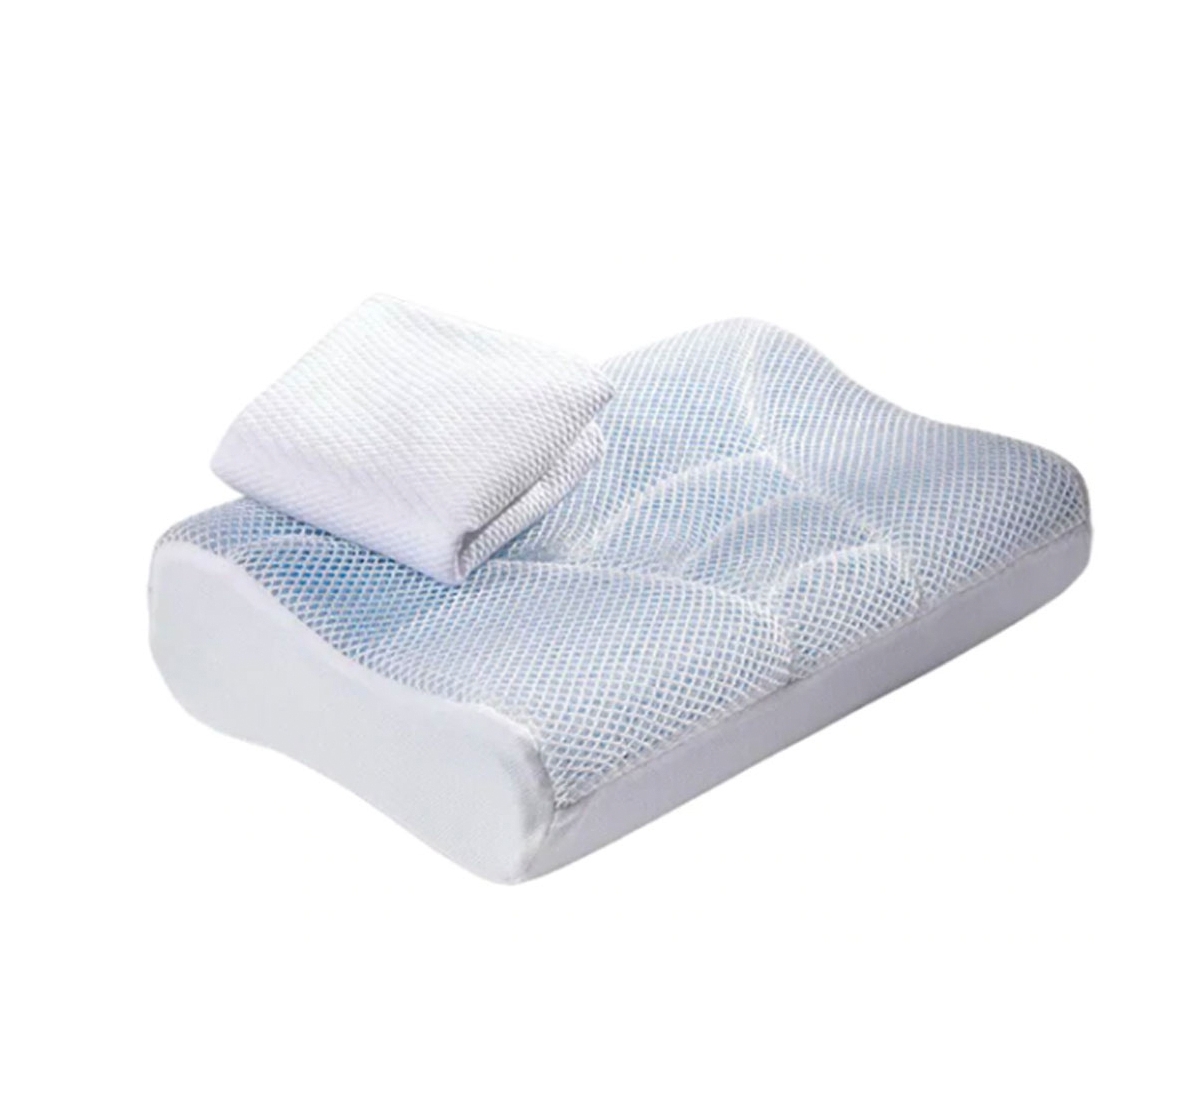 Dr Pillow Cool Air Memory Foam Pillow By Doctor Pillow In White